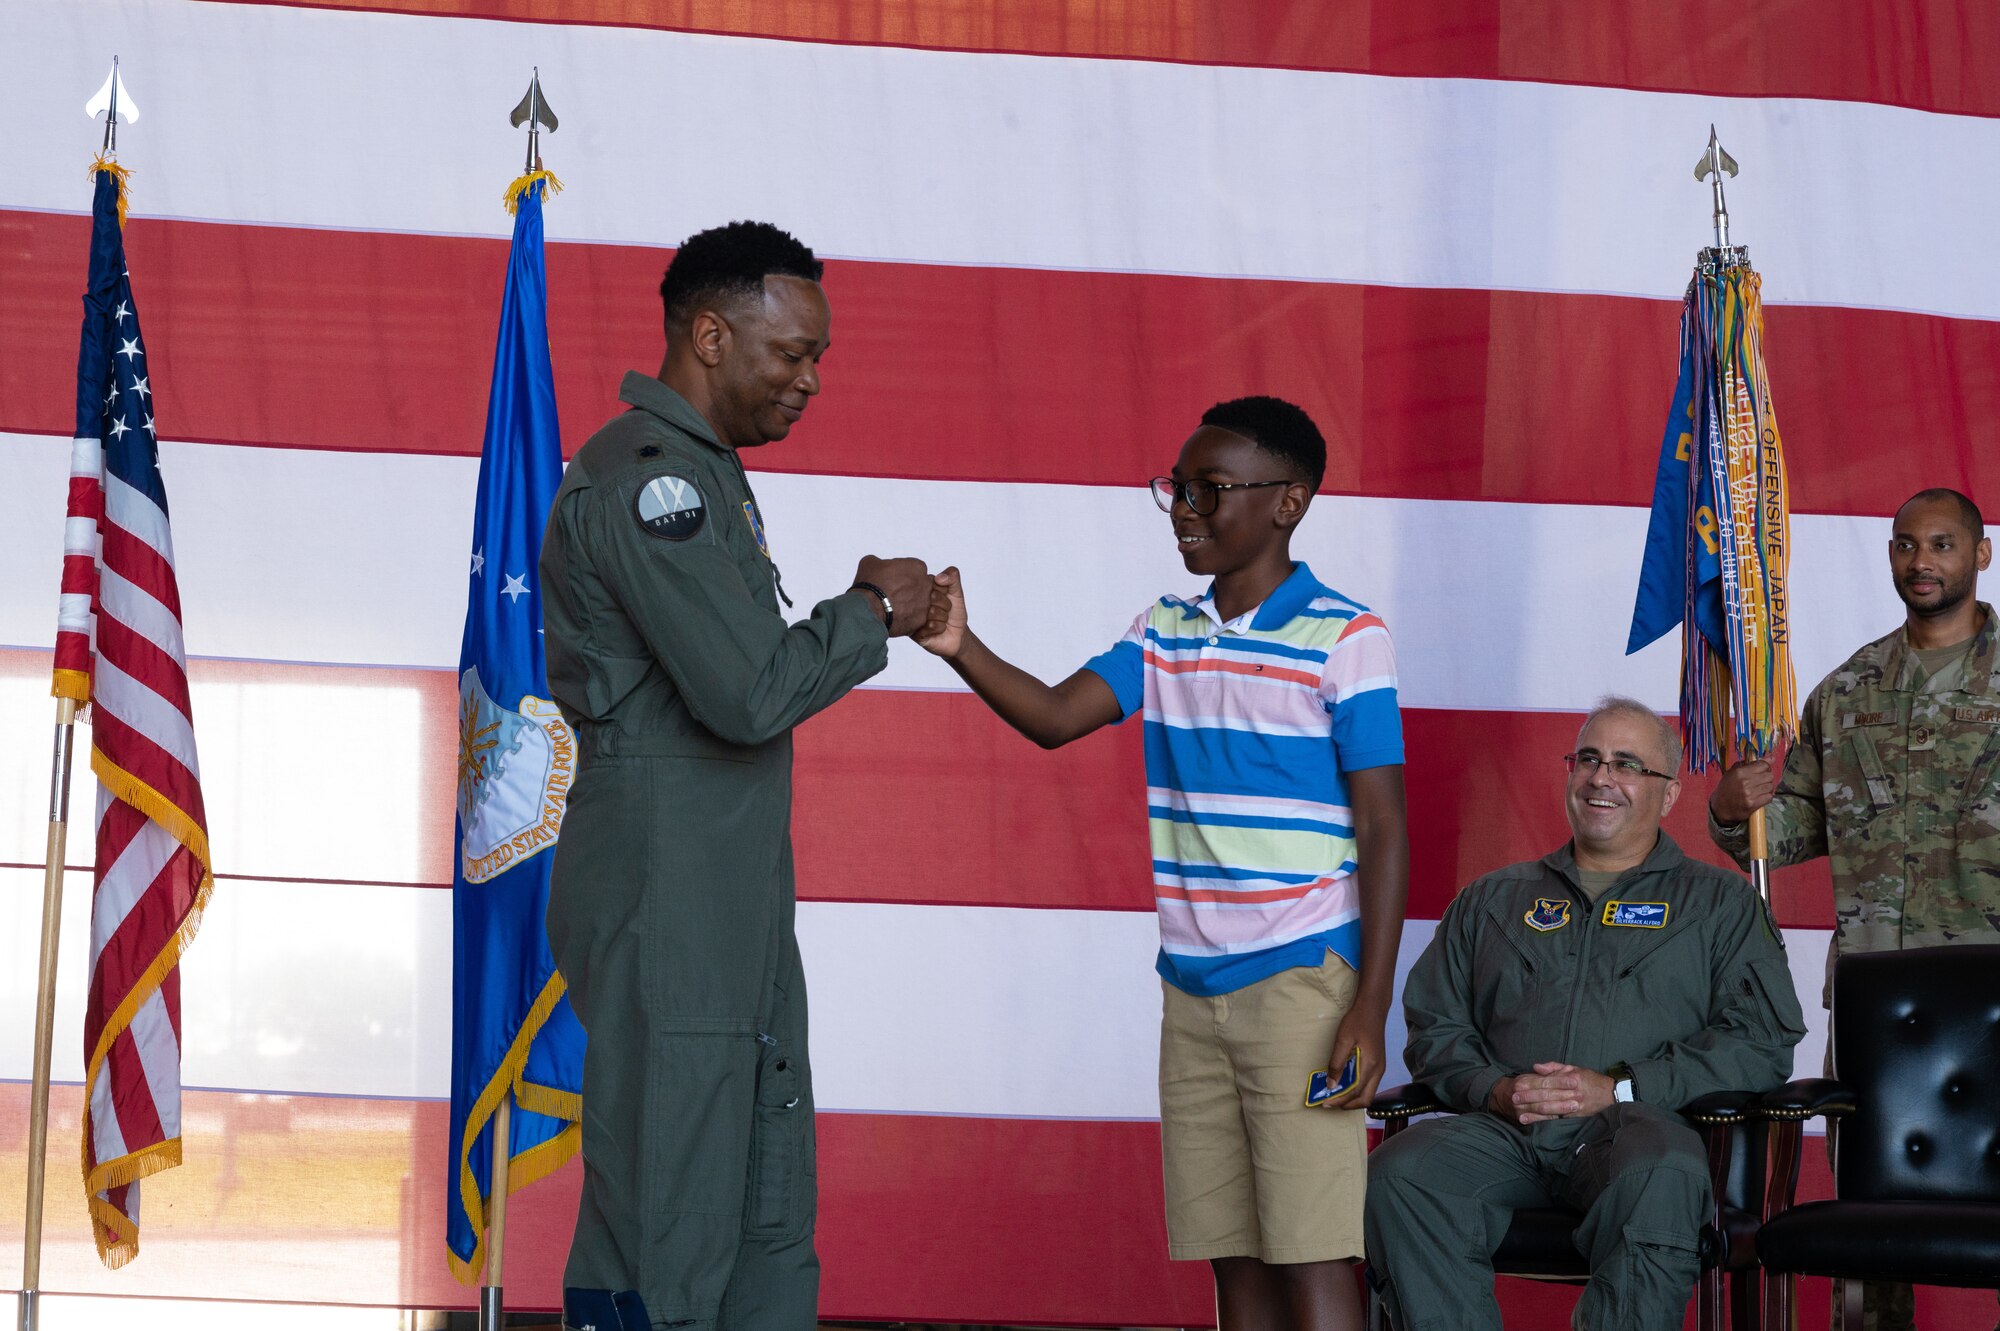 U.S. Air Force Lt. Col. Brian Milner, 9th Bomb Squadron commander, greets his son during the 9th BS change of command at Dyess Air Force Base, Texas, July 7, 2023. Milner is in charge of leading the 9th BS which is the oldest active bomb squadron in the Air Force and maintains combat readiness to ensure delivery of rapid and decisive airpower on a large scale in support of conventional warfare taskings around the world. (U.S. Air Force photo by Airman 1st Class Alondra Cristobal Hernandez)